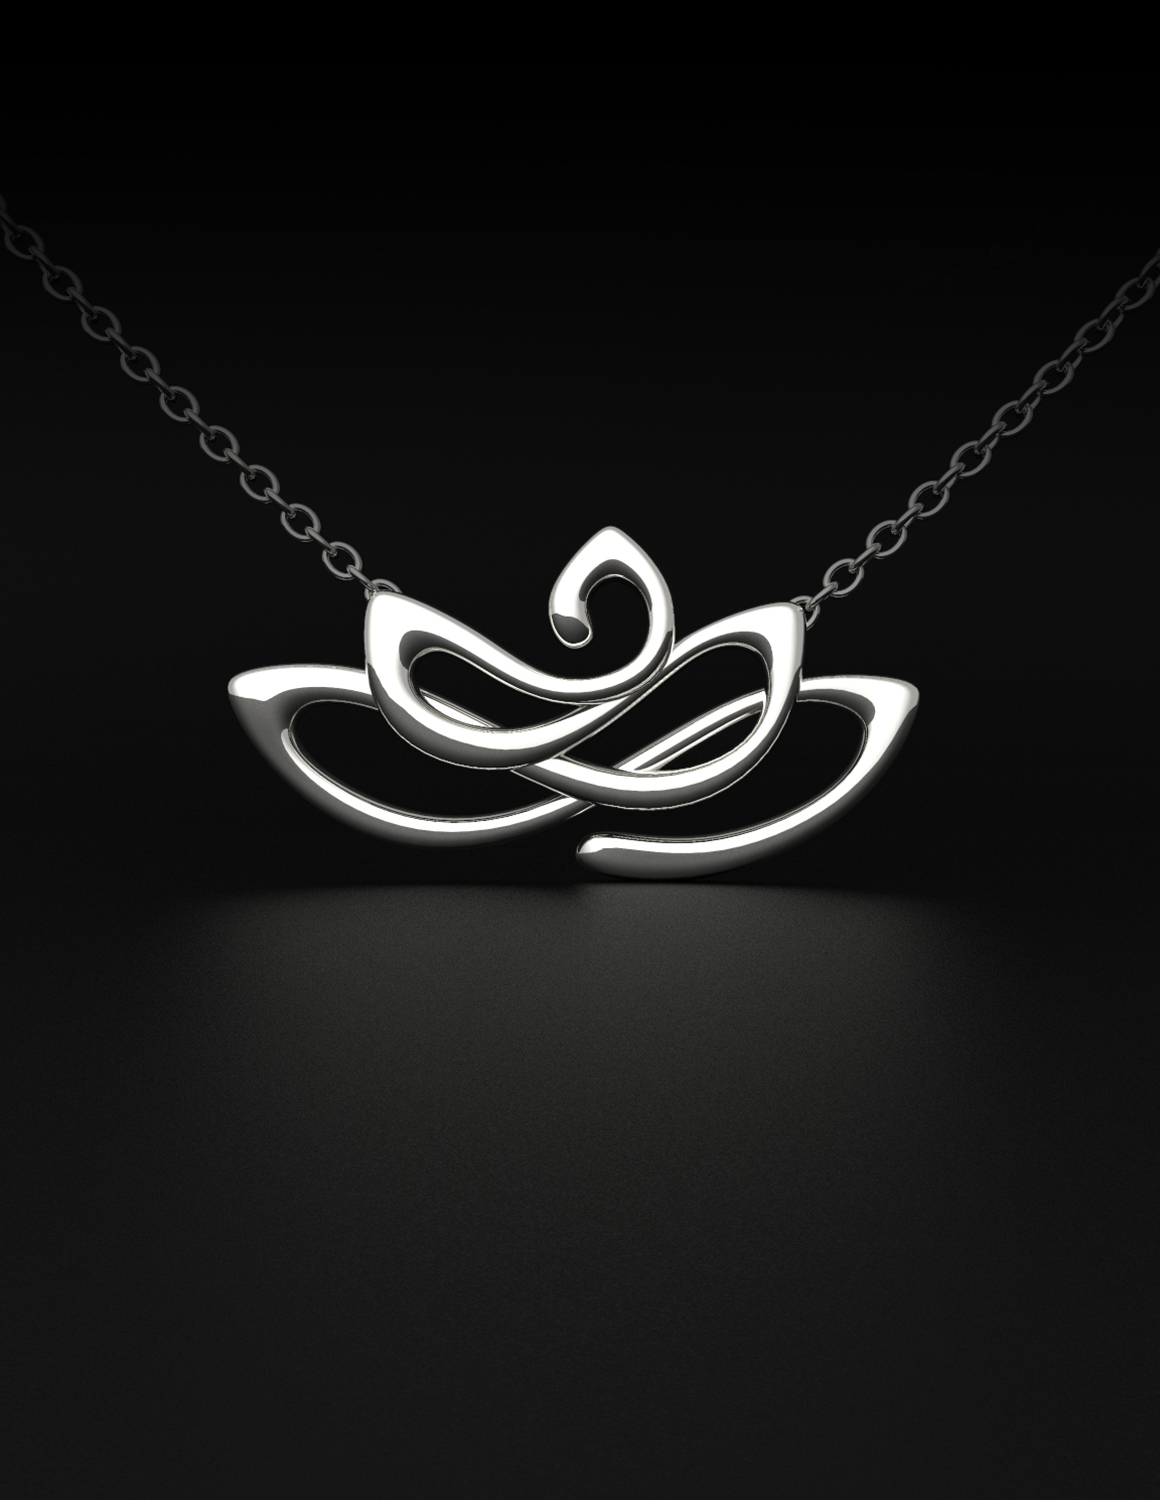 Sterling Silver Lotus Medallion Charm Necklace